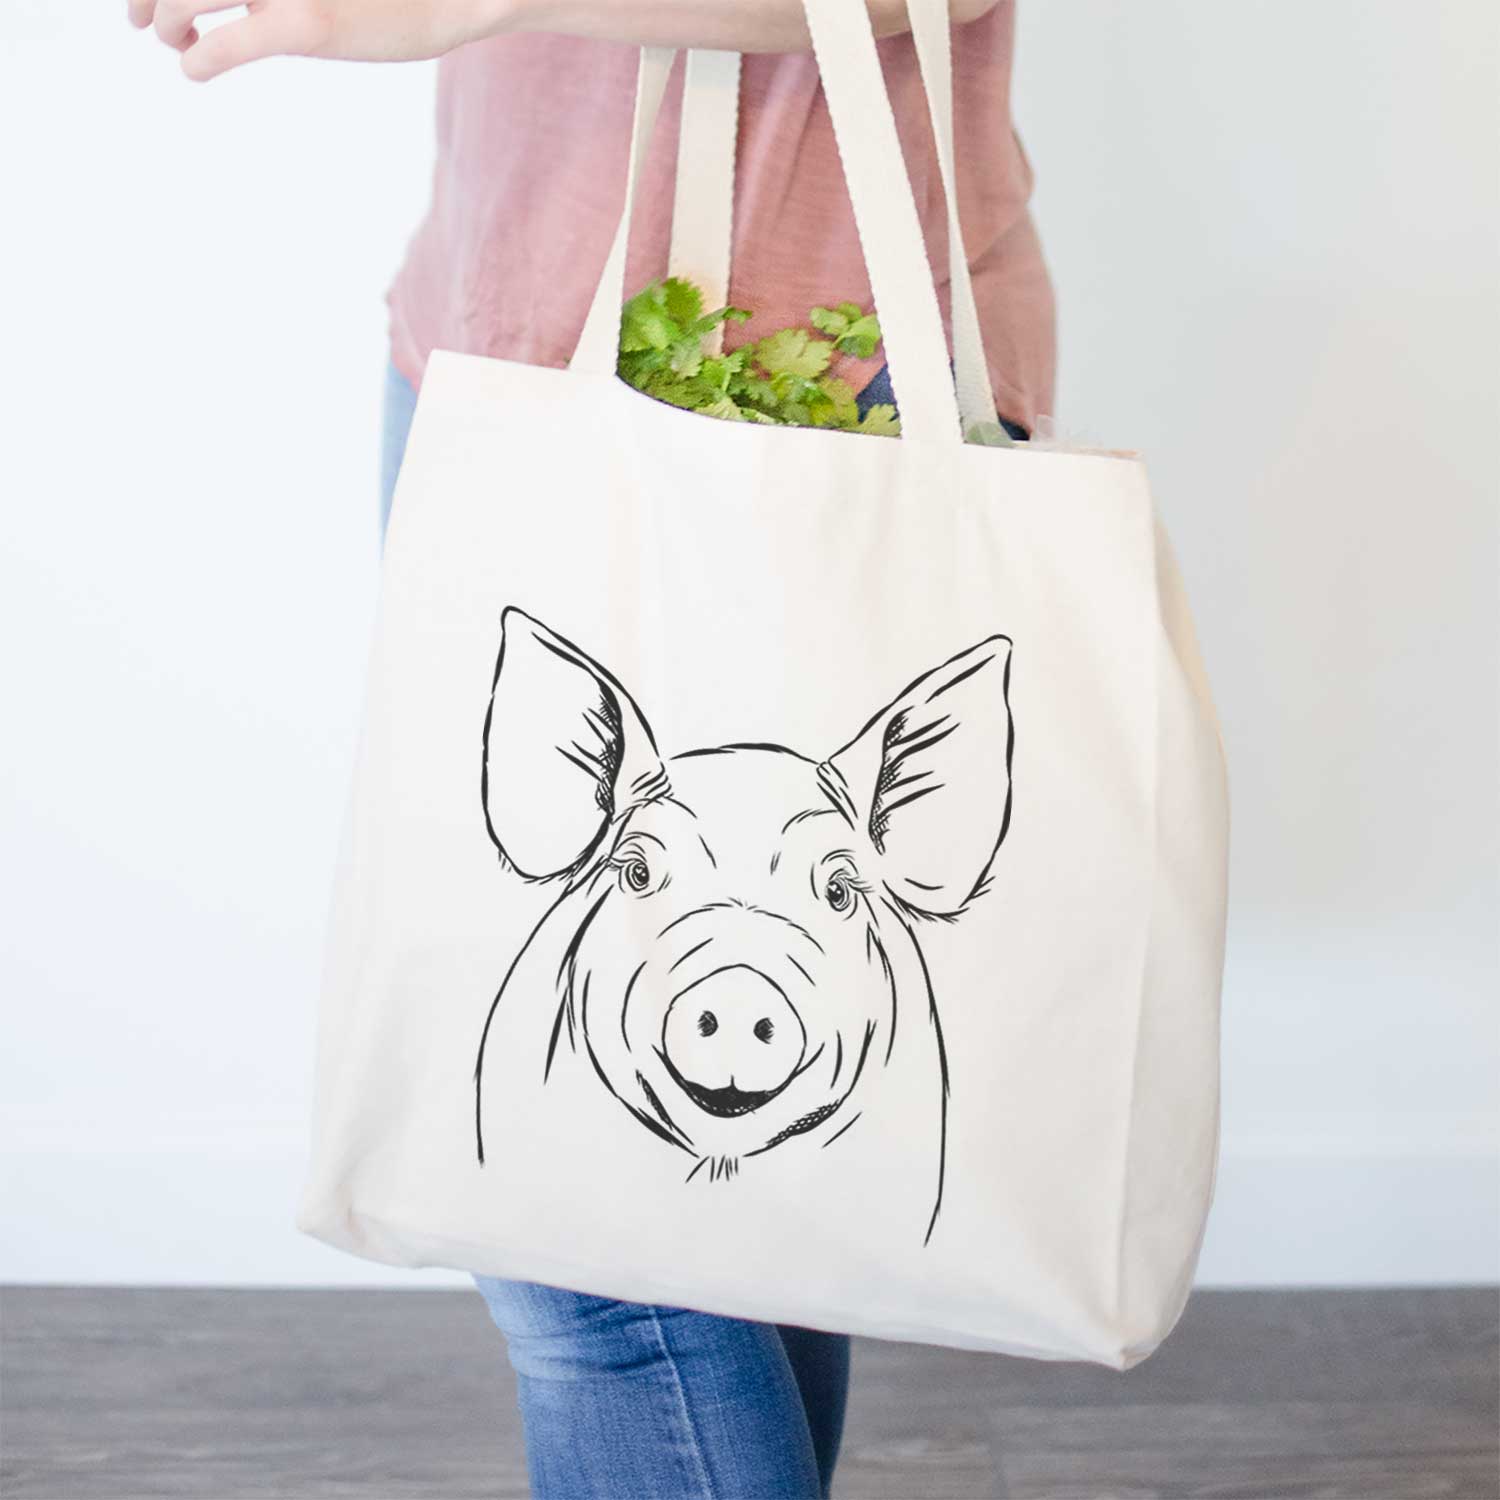 Perry the Pig - Tote Bag